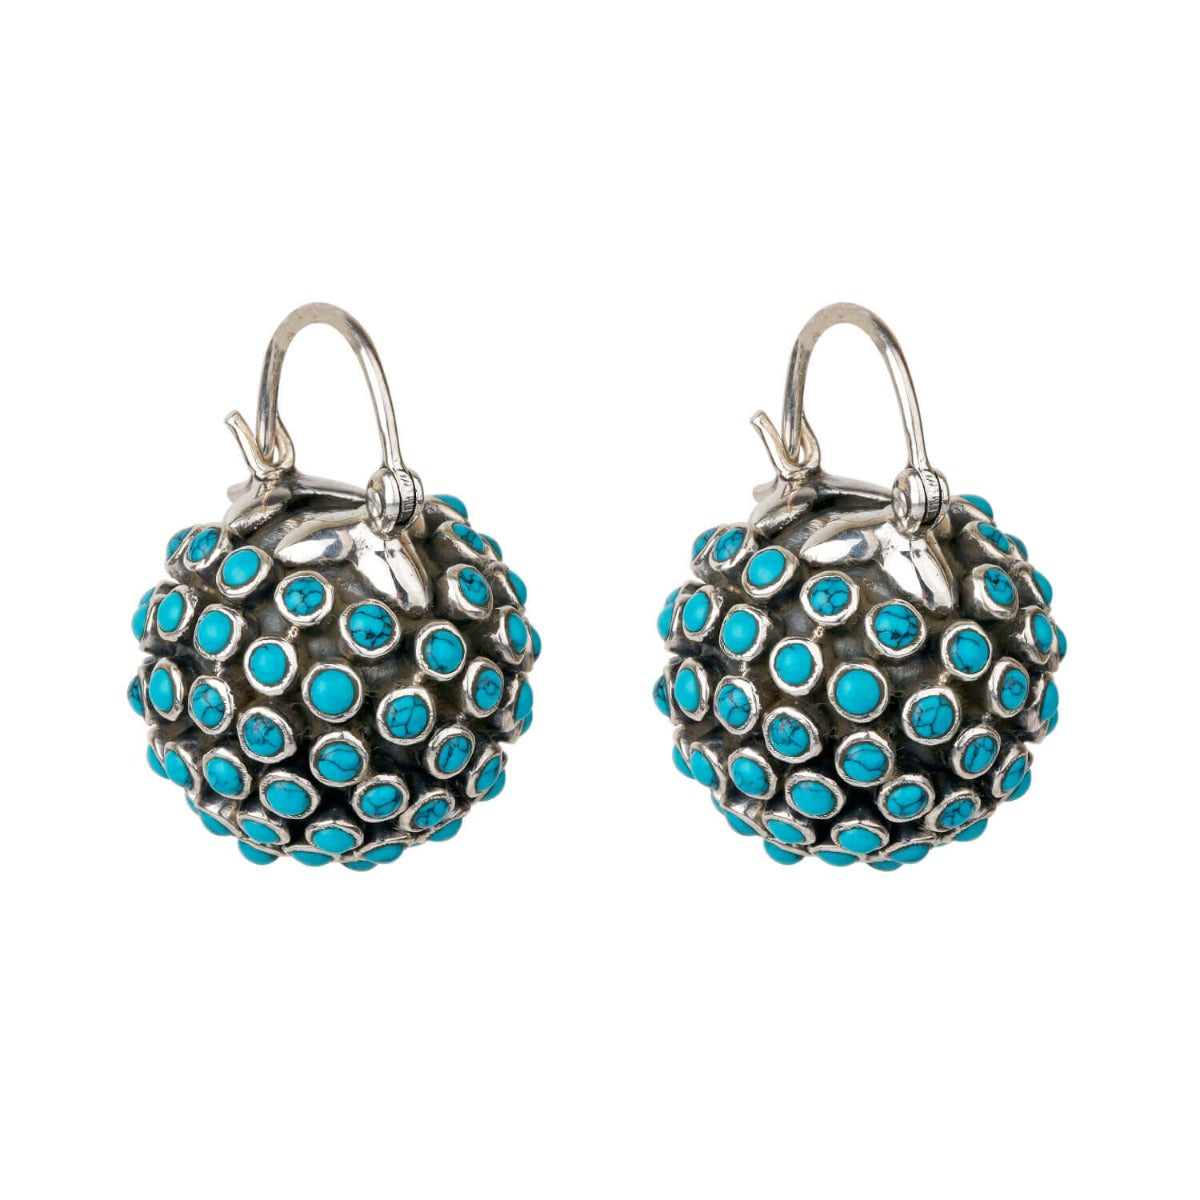 Turquoise round hoops